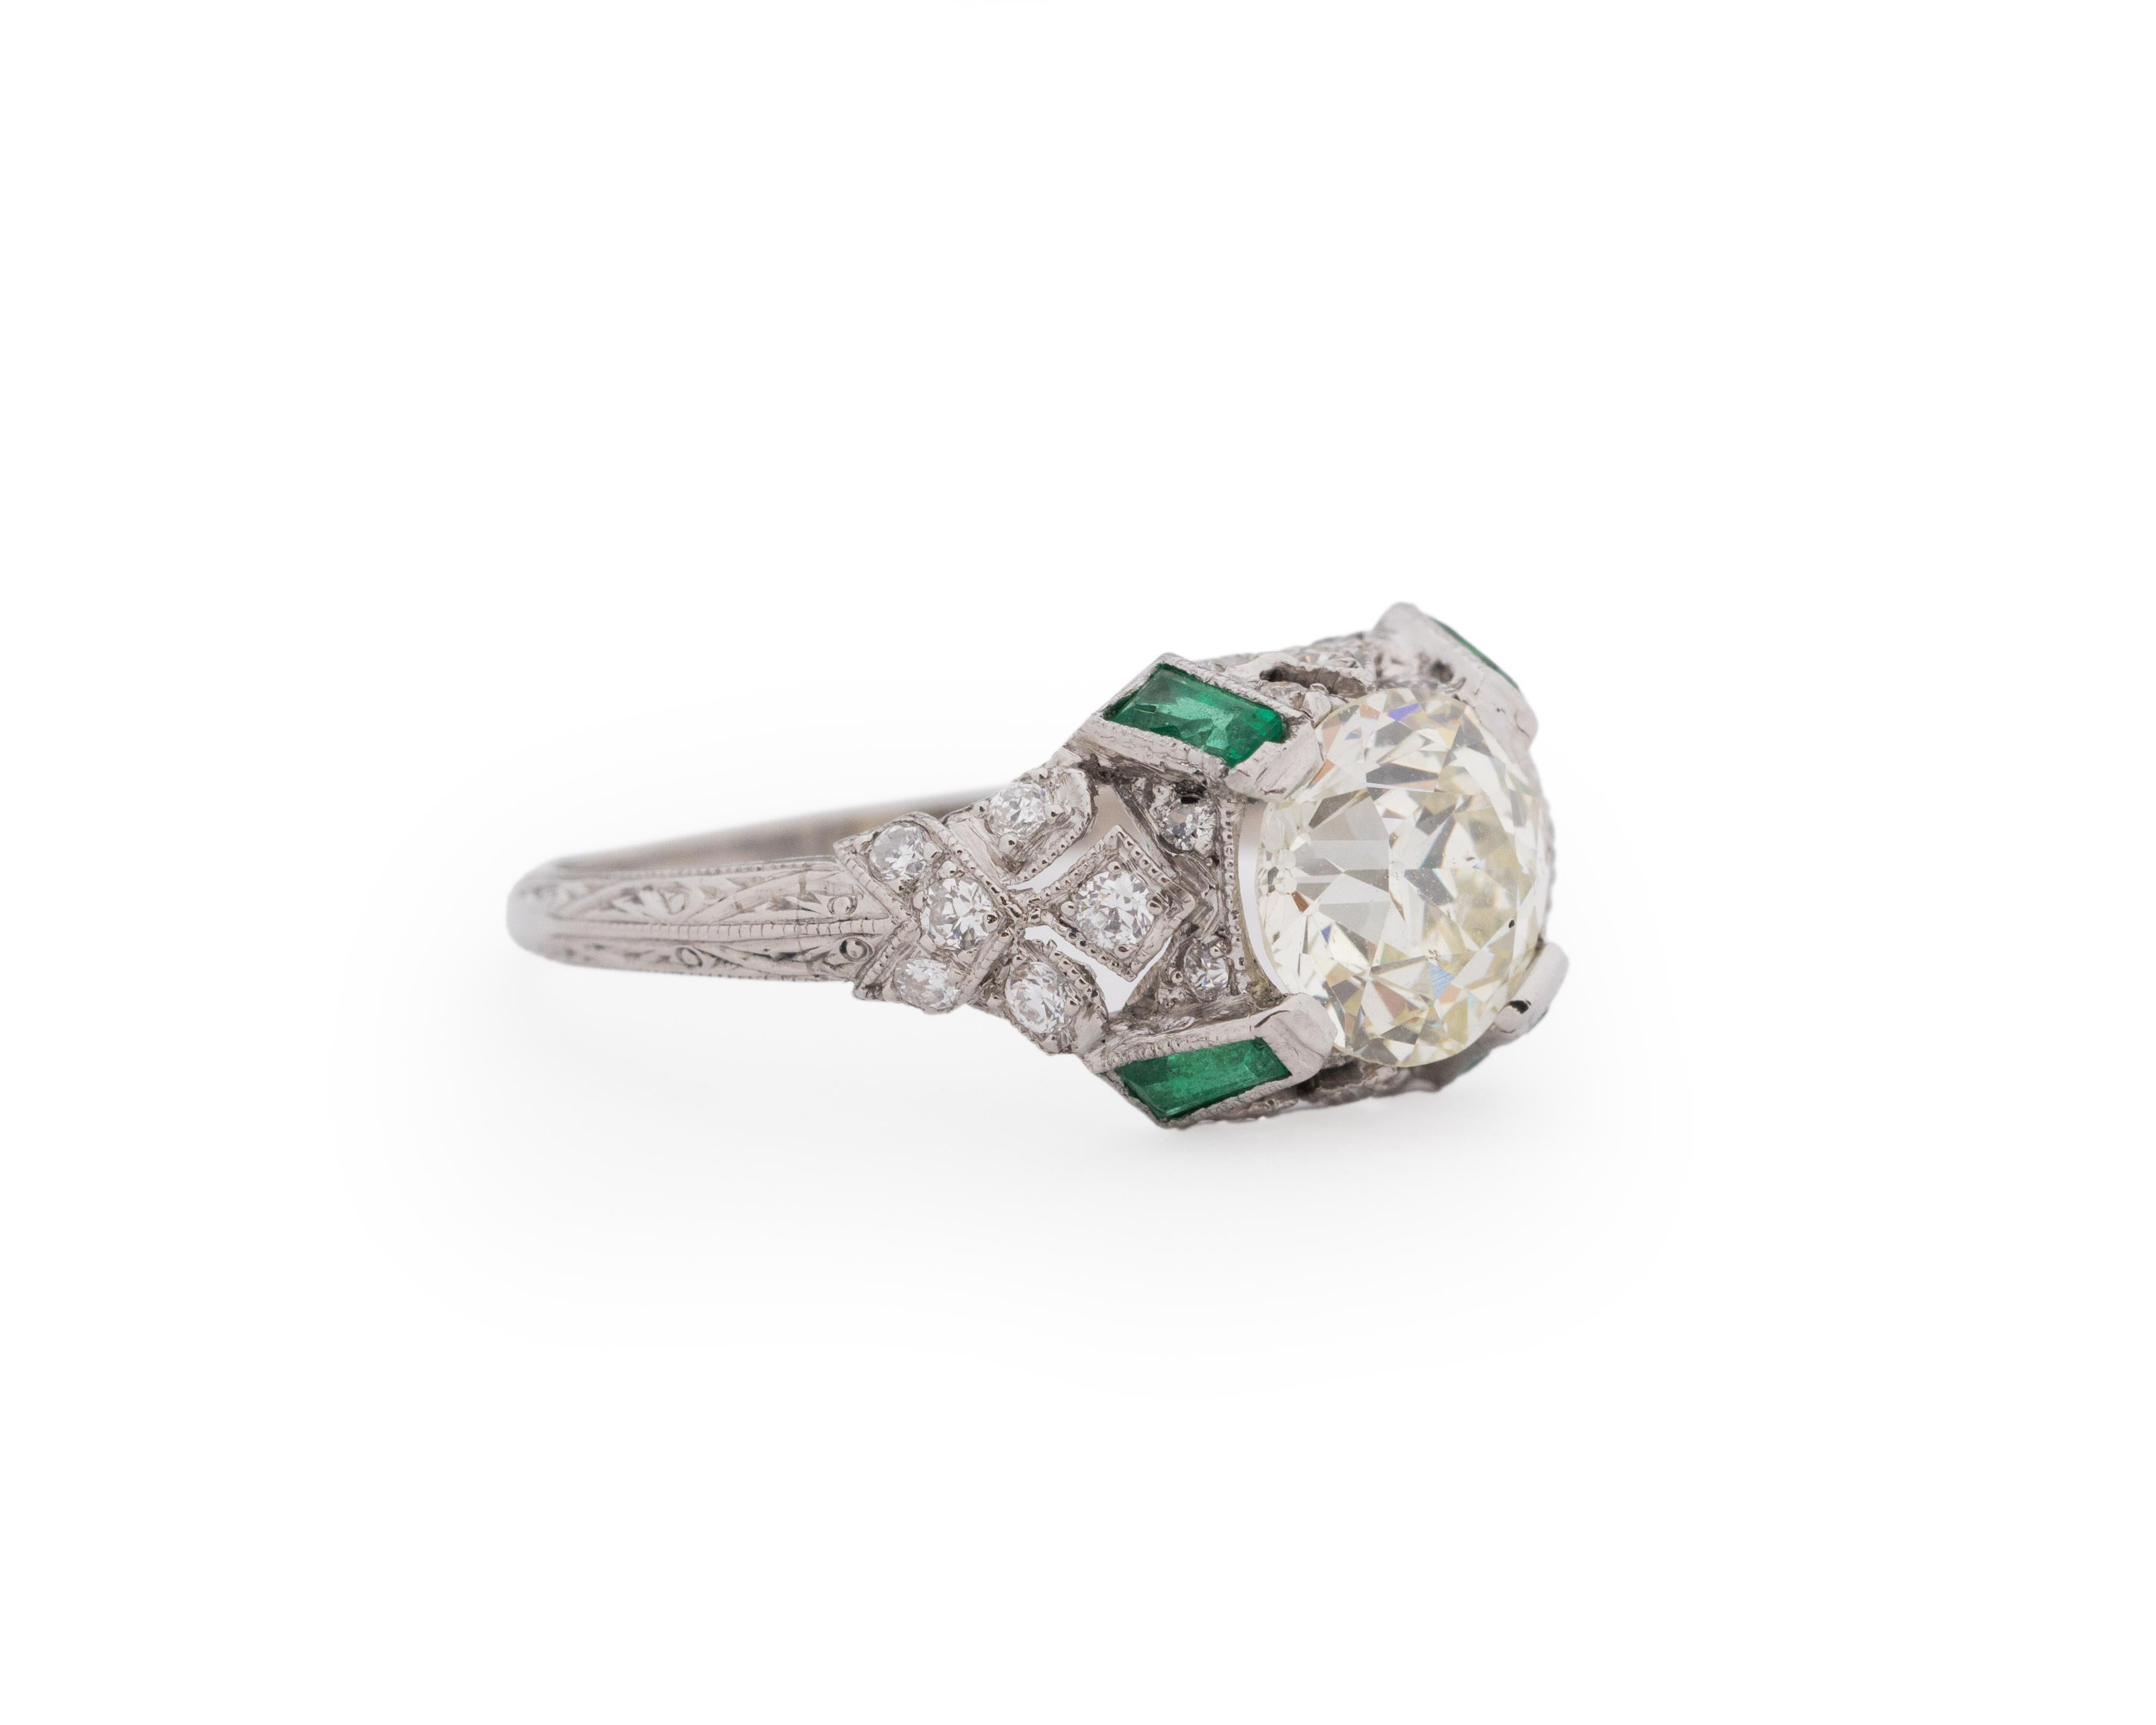 Year: 1920s

Item Details:
Ring Size: 7
Metal Type: Platinum [Hallmarked, and Tested]
Weight: 3.4 grams

Center Diamond Details:

GIA Report#: 62372111414
Weight: 1.51ct total weight
Cut: Old European brilliant
Color: N
Clarity: SI2
Type: